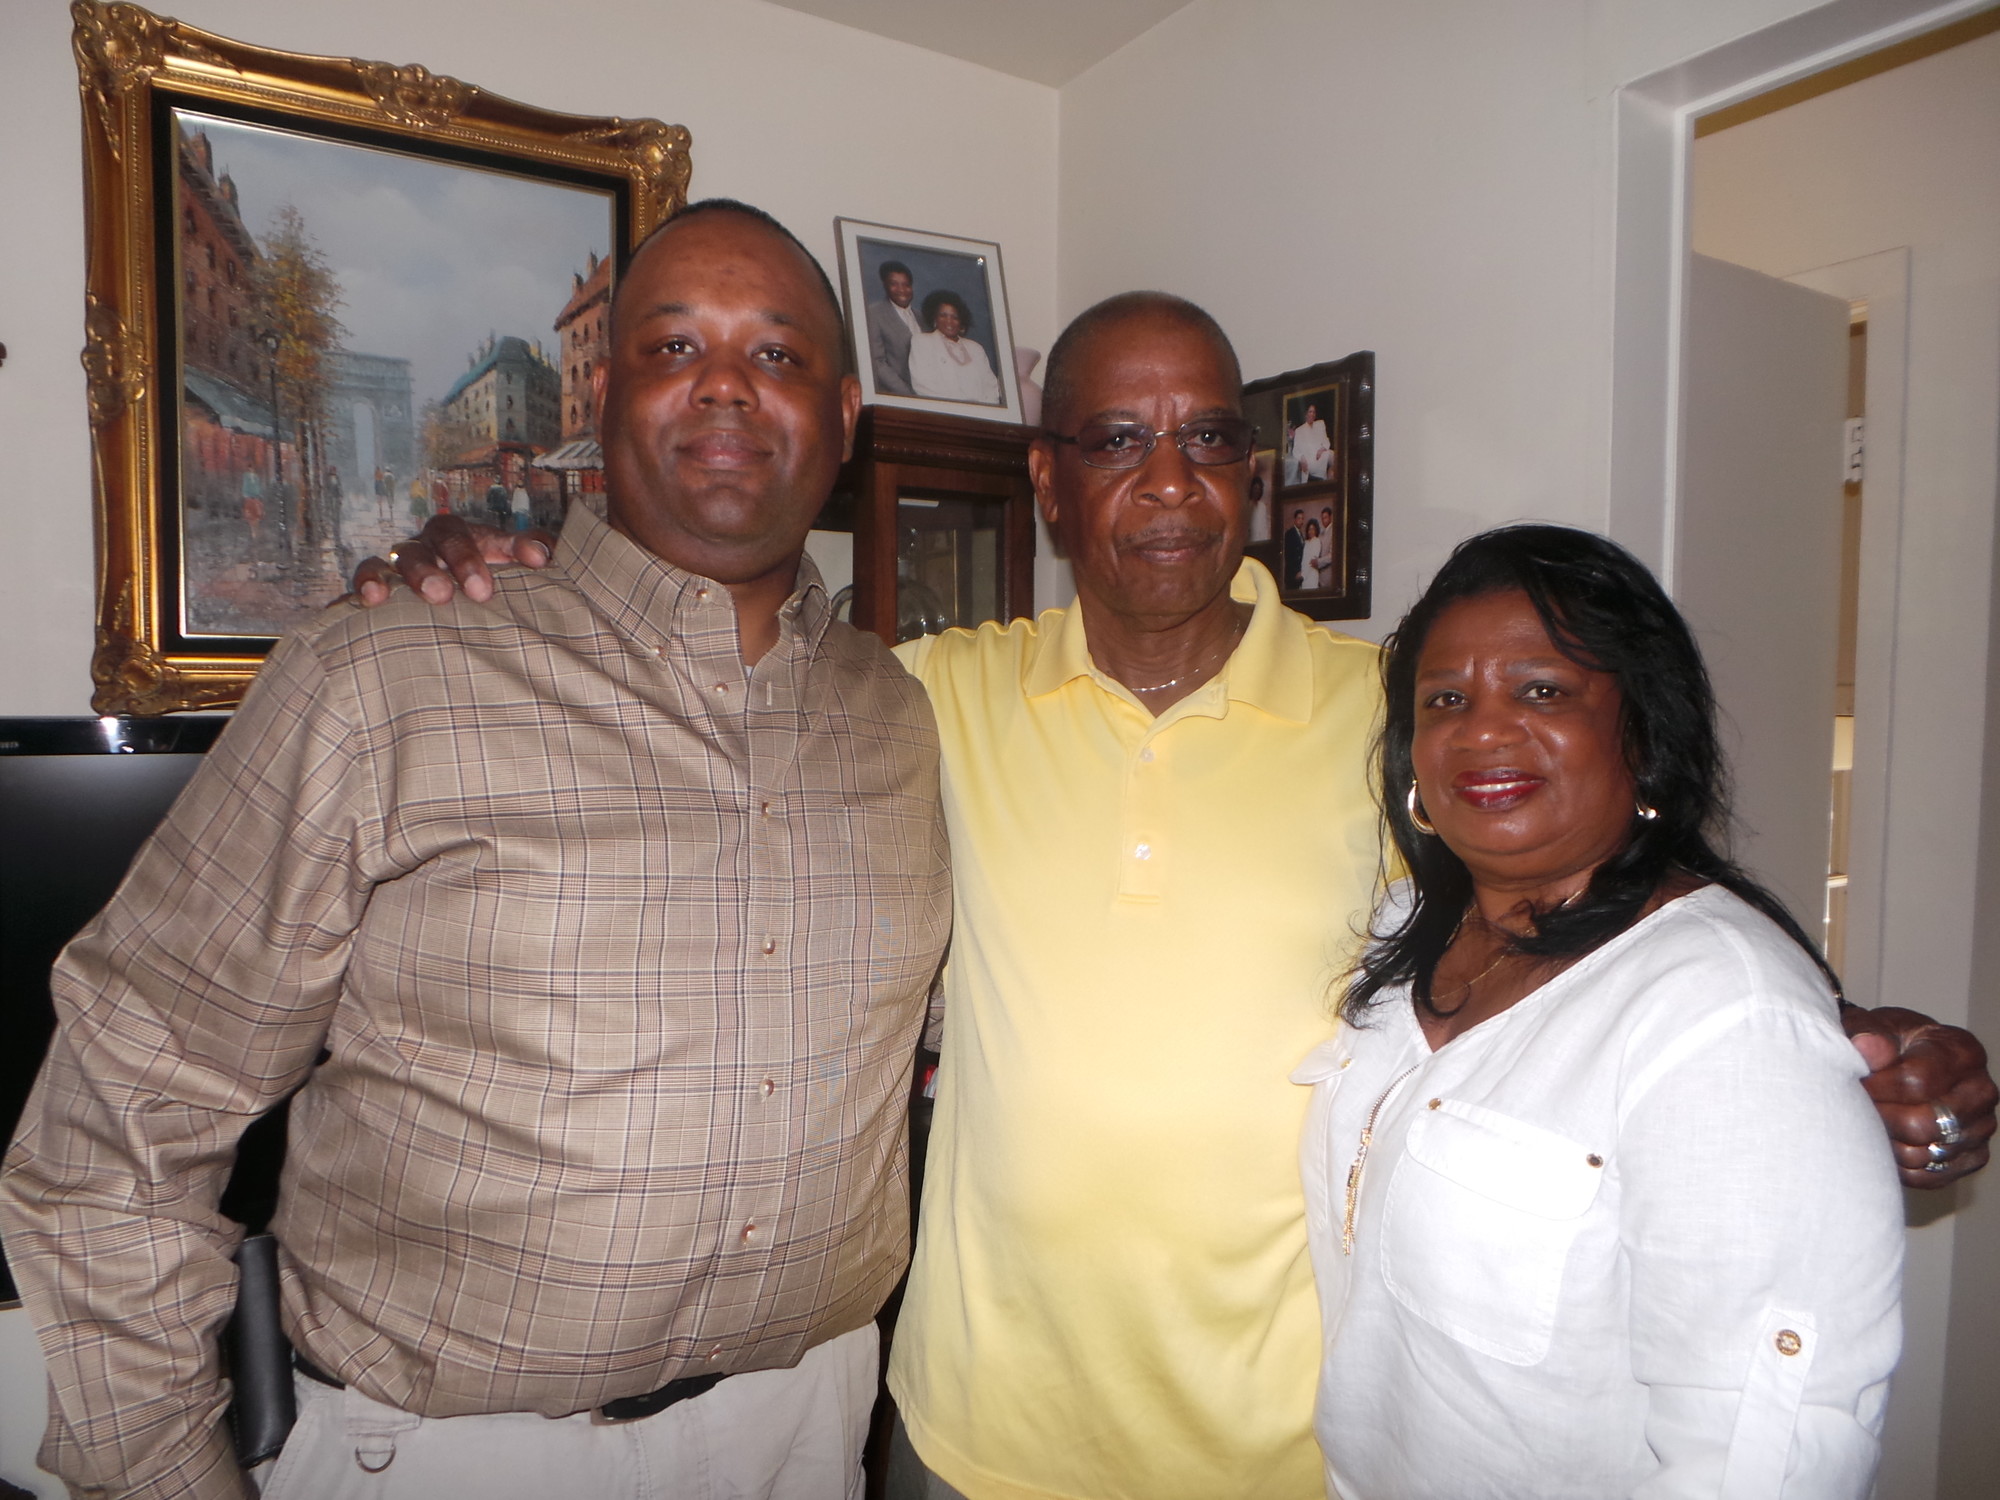 Sgt. Robert Scott III, with his father and mother, Robert Scott Jr. and Valence, in their home on the newly dedicated Sgt. Robert Scott III Boulevard.